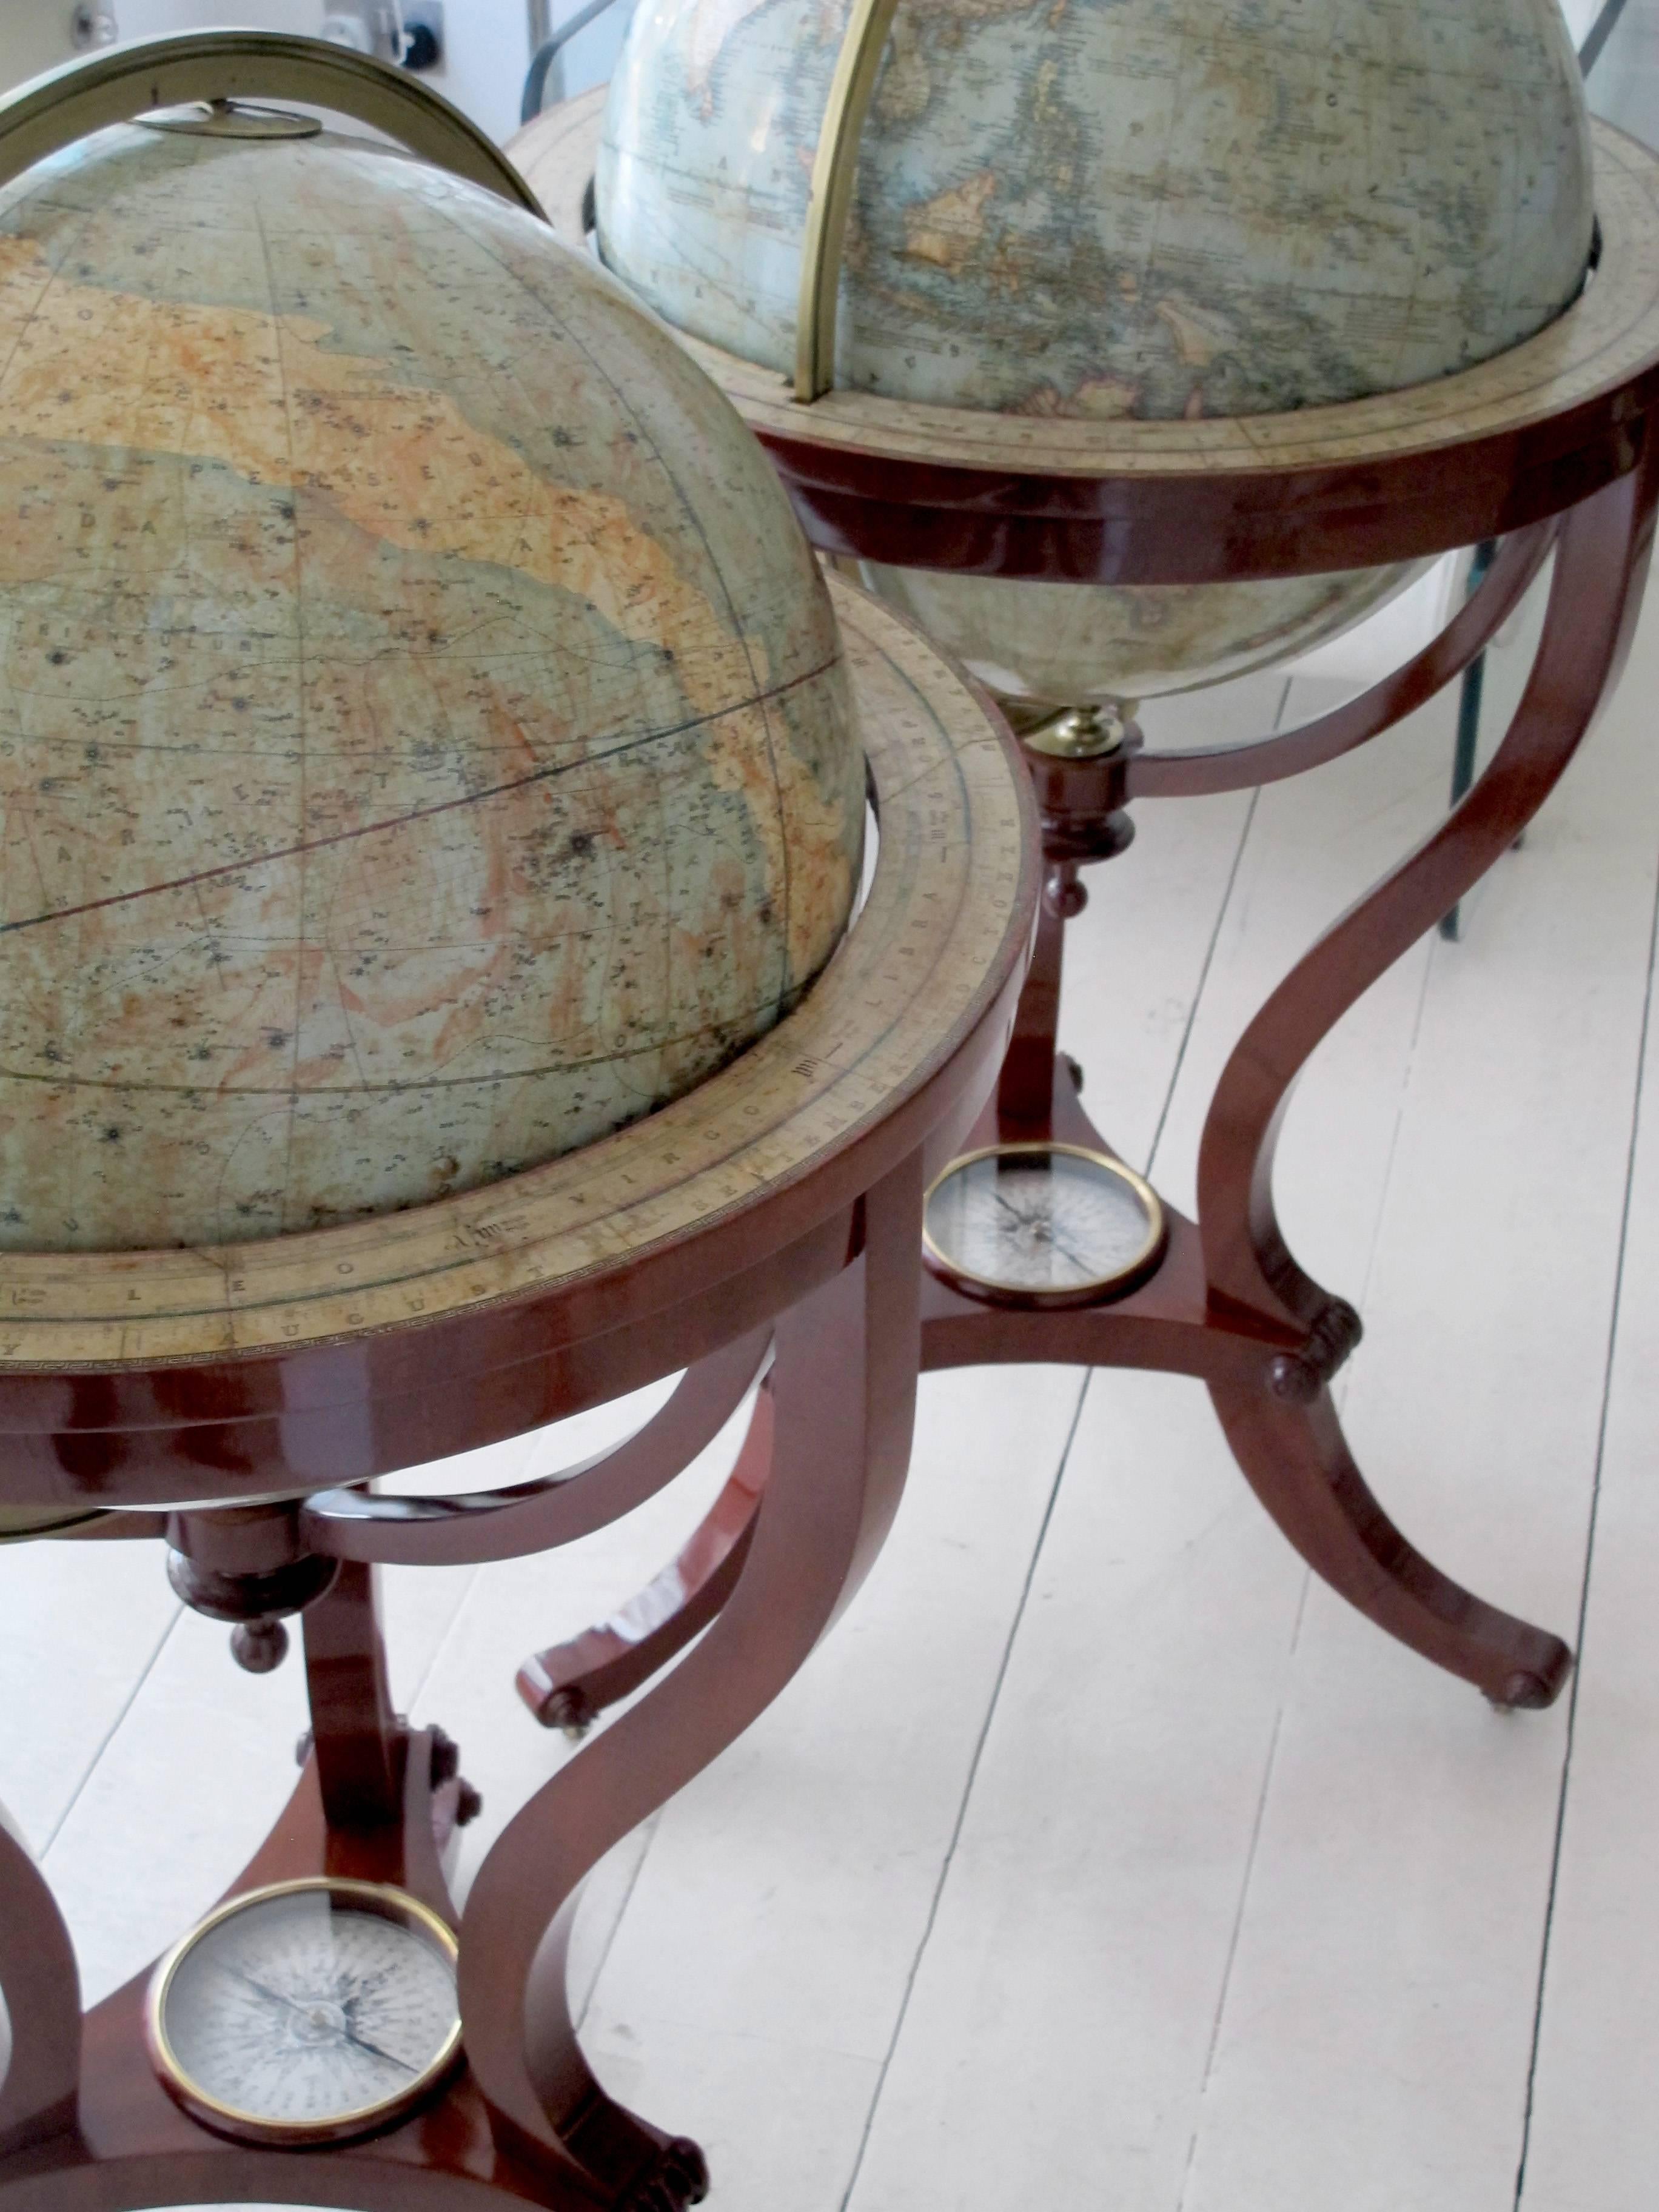 Pair of terrestrial and celestial library globes with compassases
Thomas Malby and Company.
1851 and 1850,
London,
on Mahogany stands, casters.

Height 110 cm.
Diameter 65 cm.